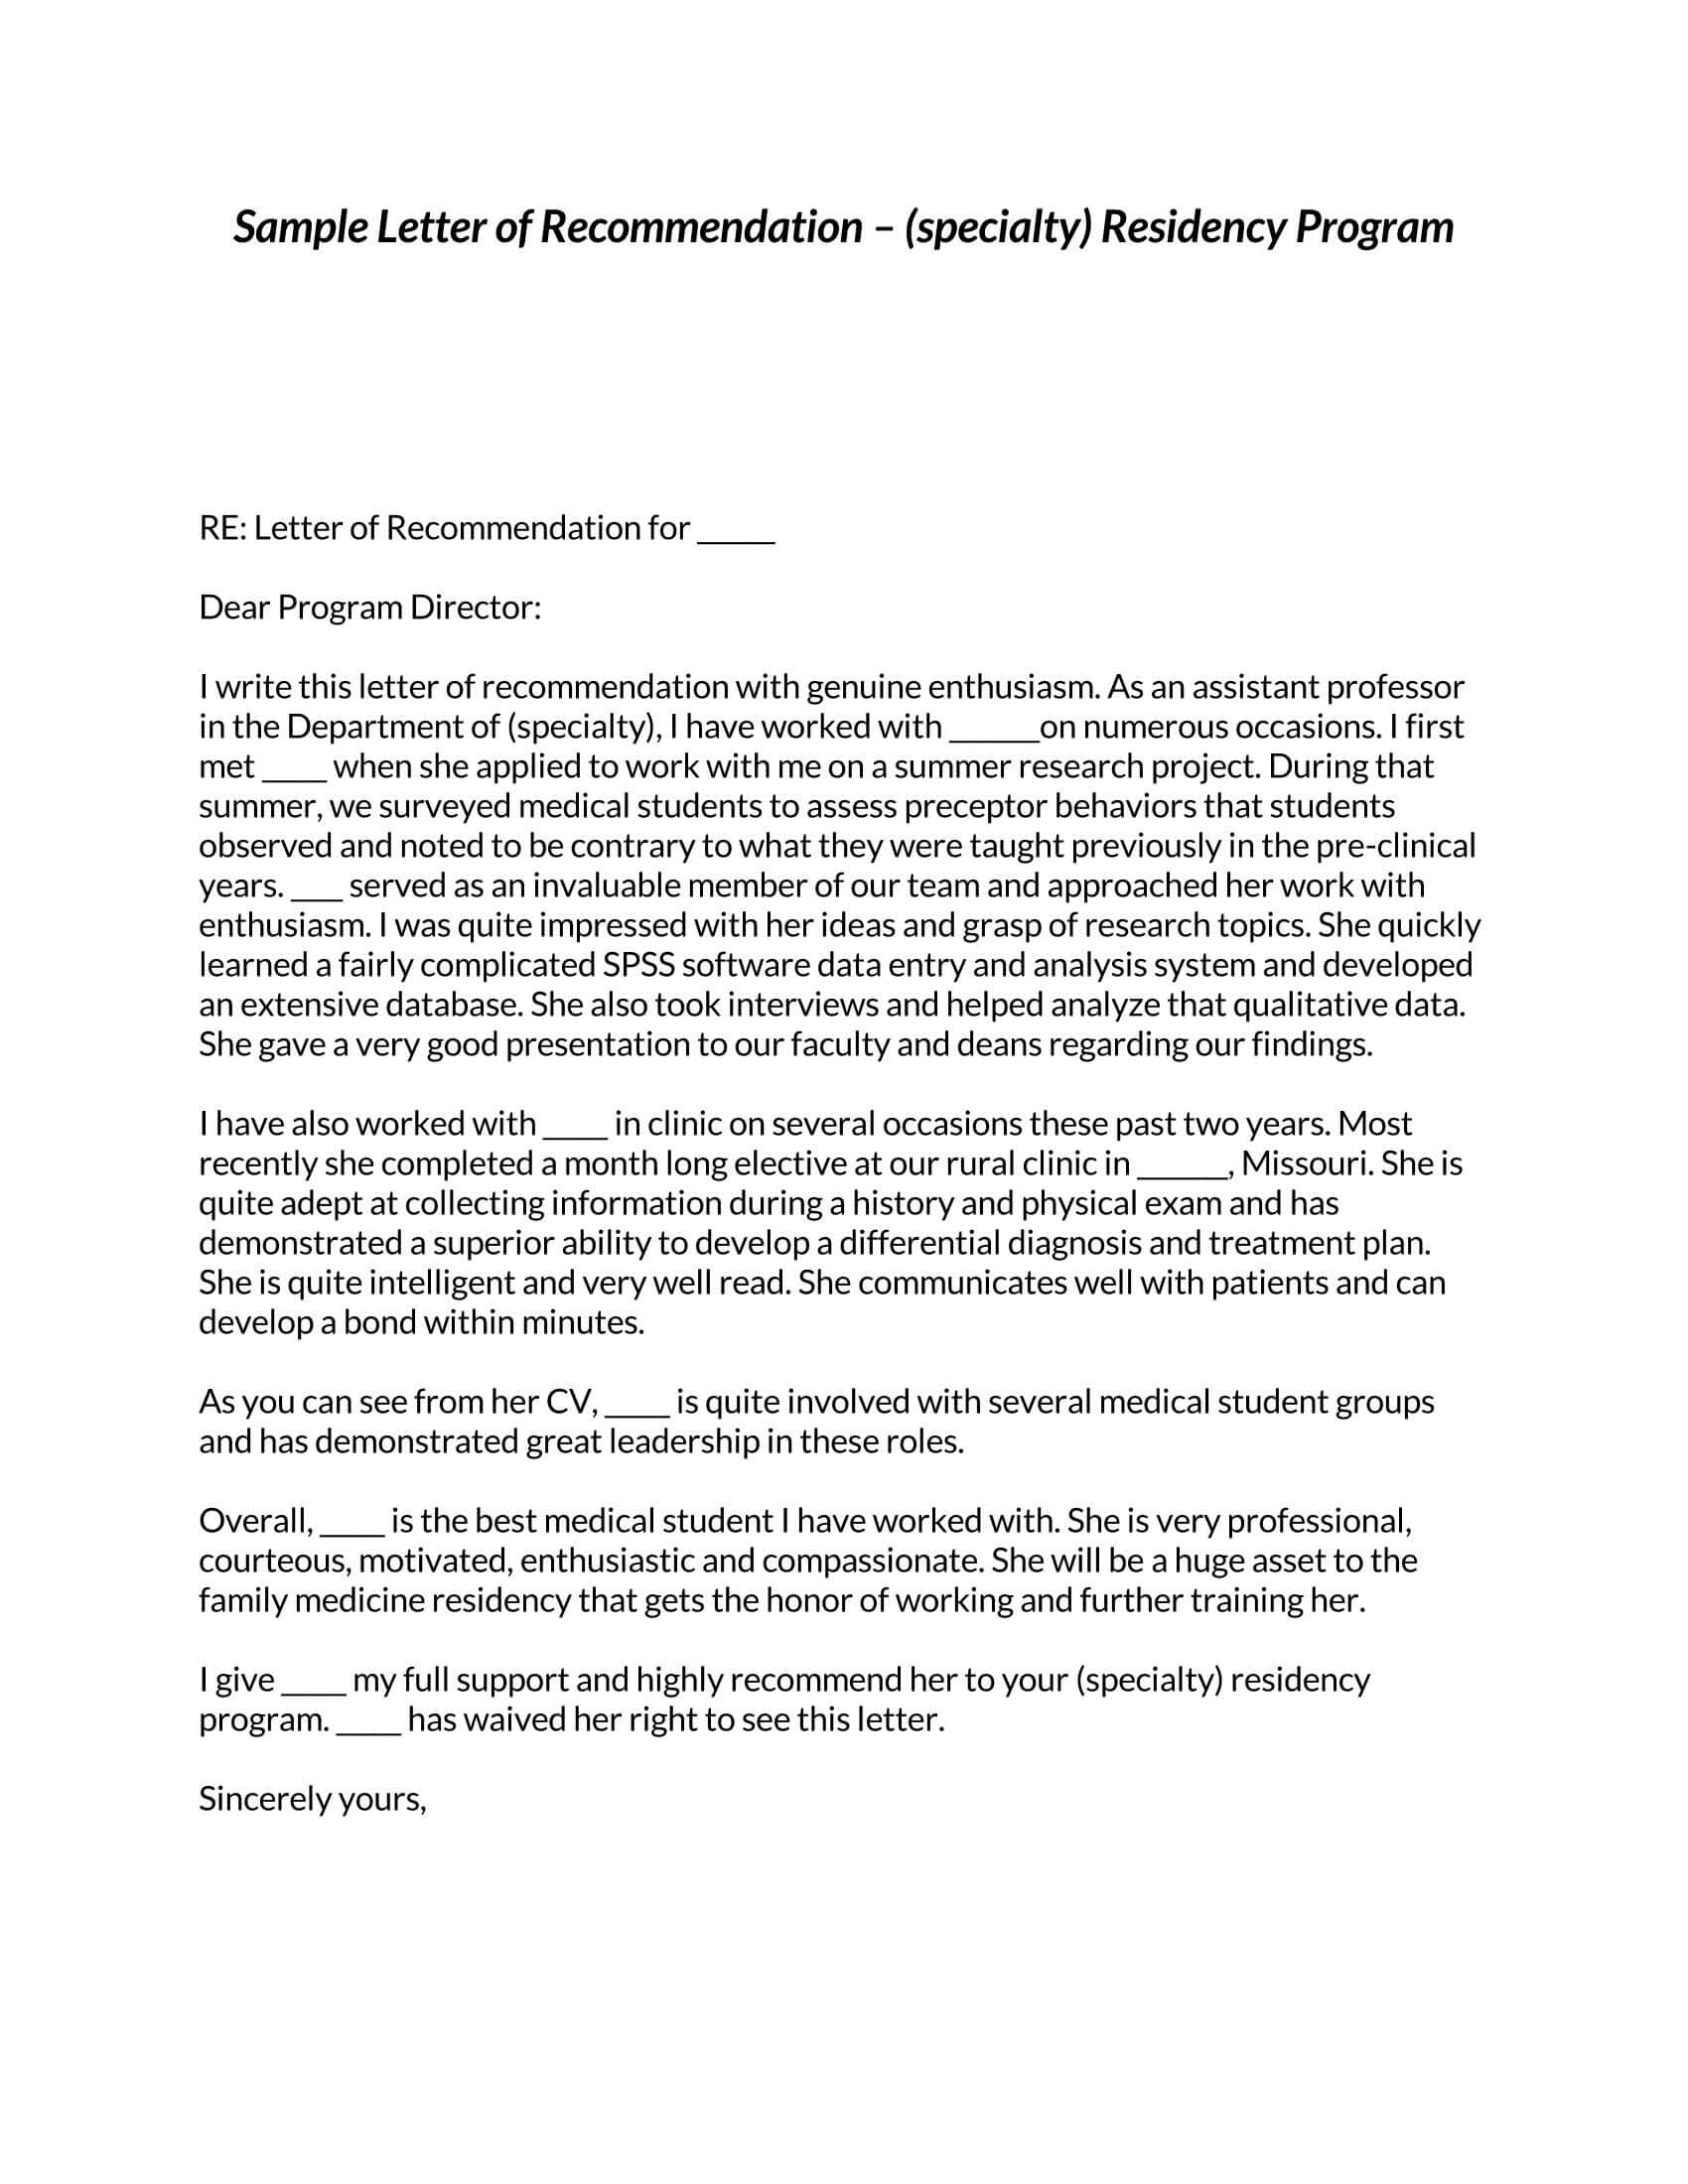 "Professional Recommendation Letter Template"